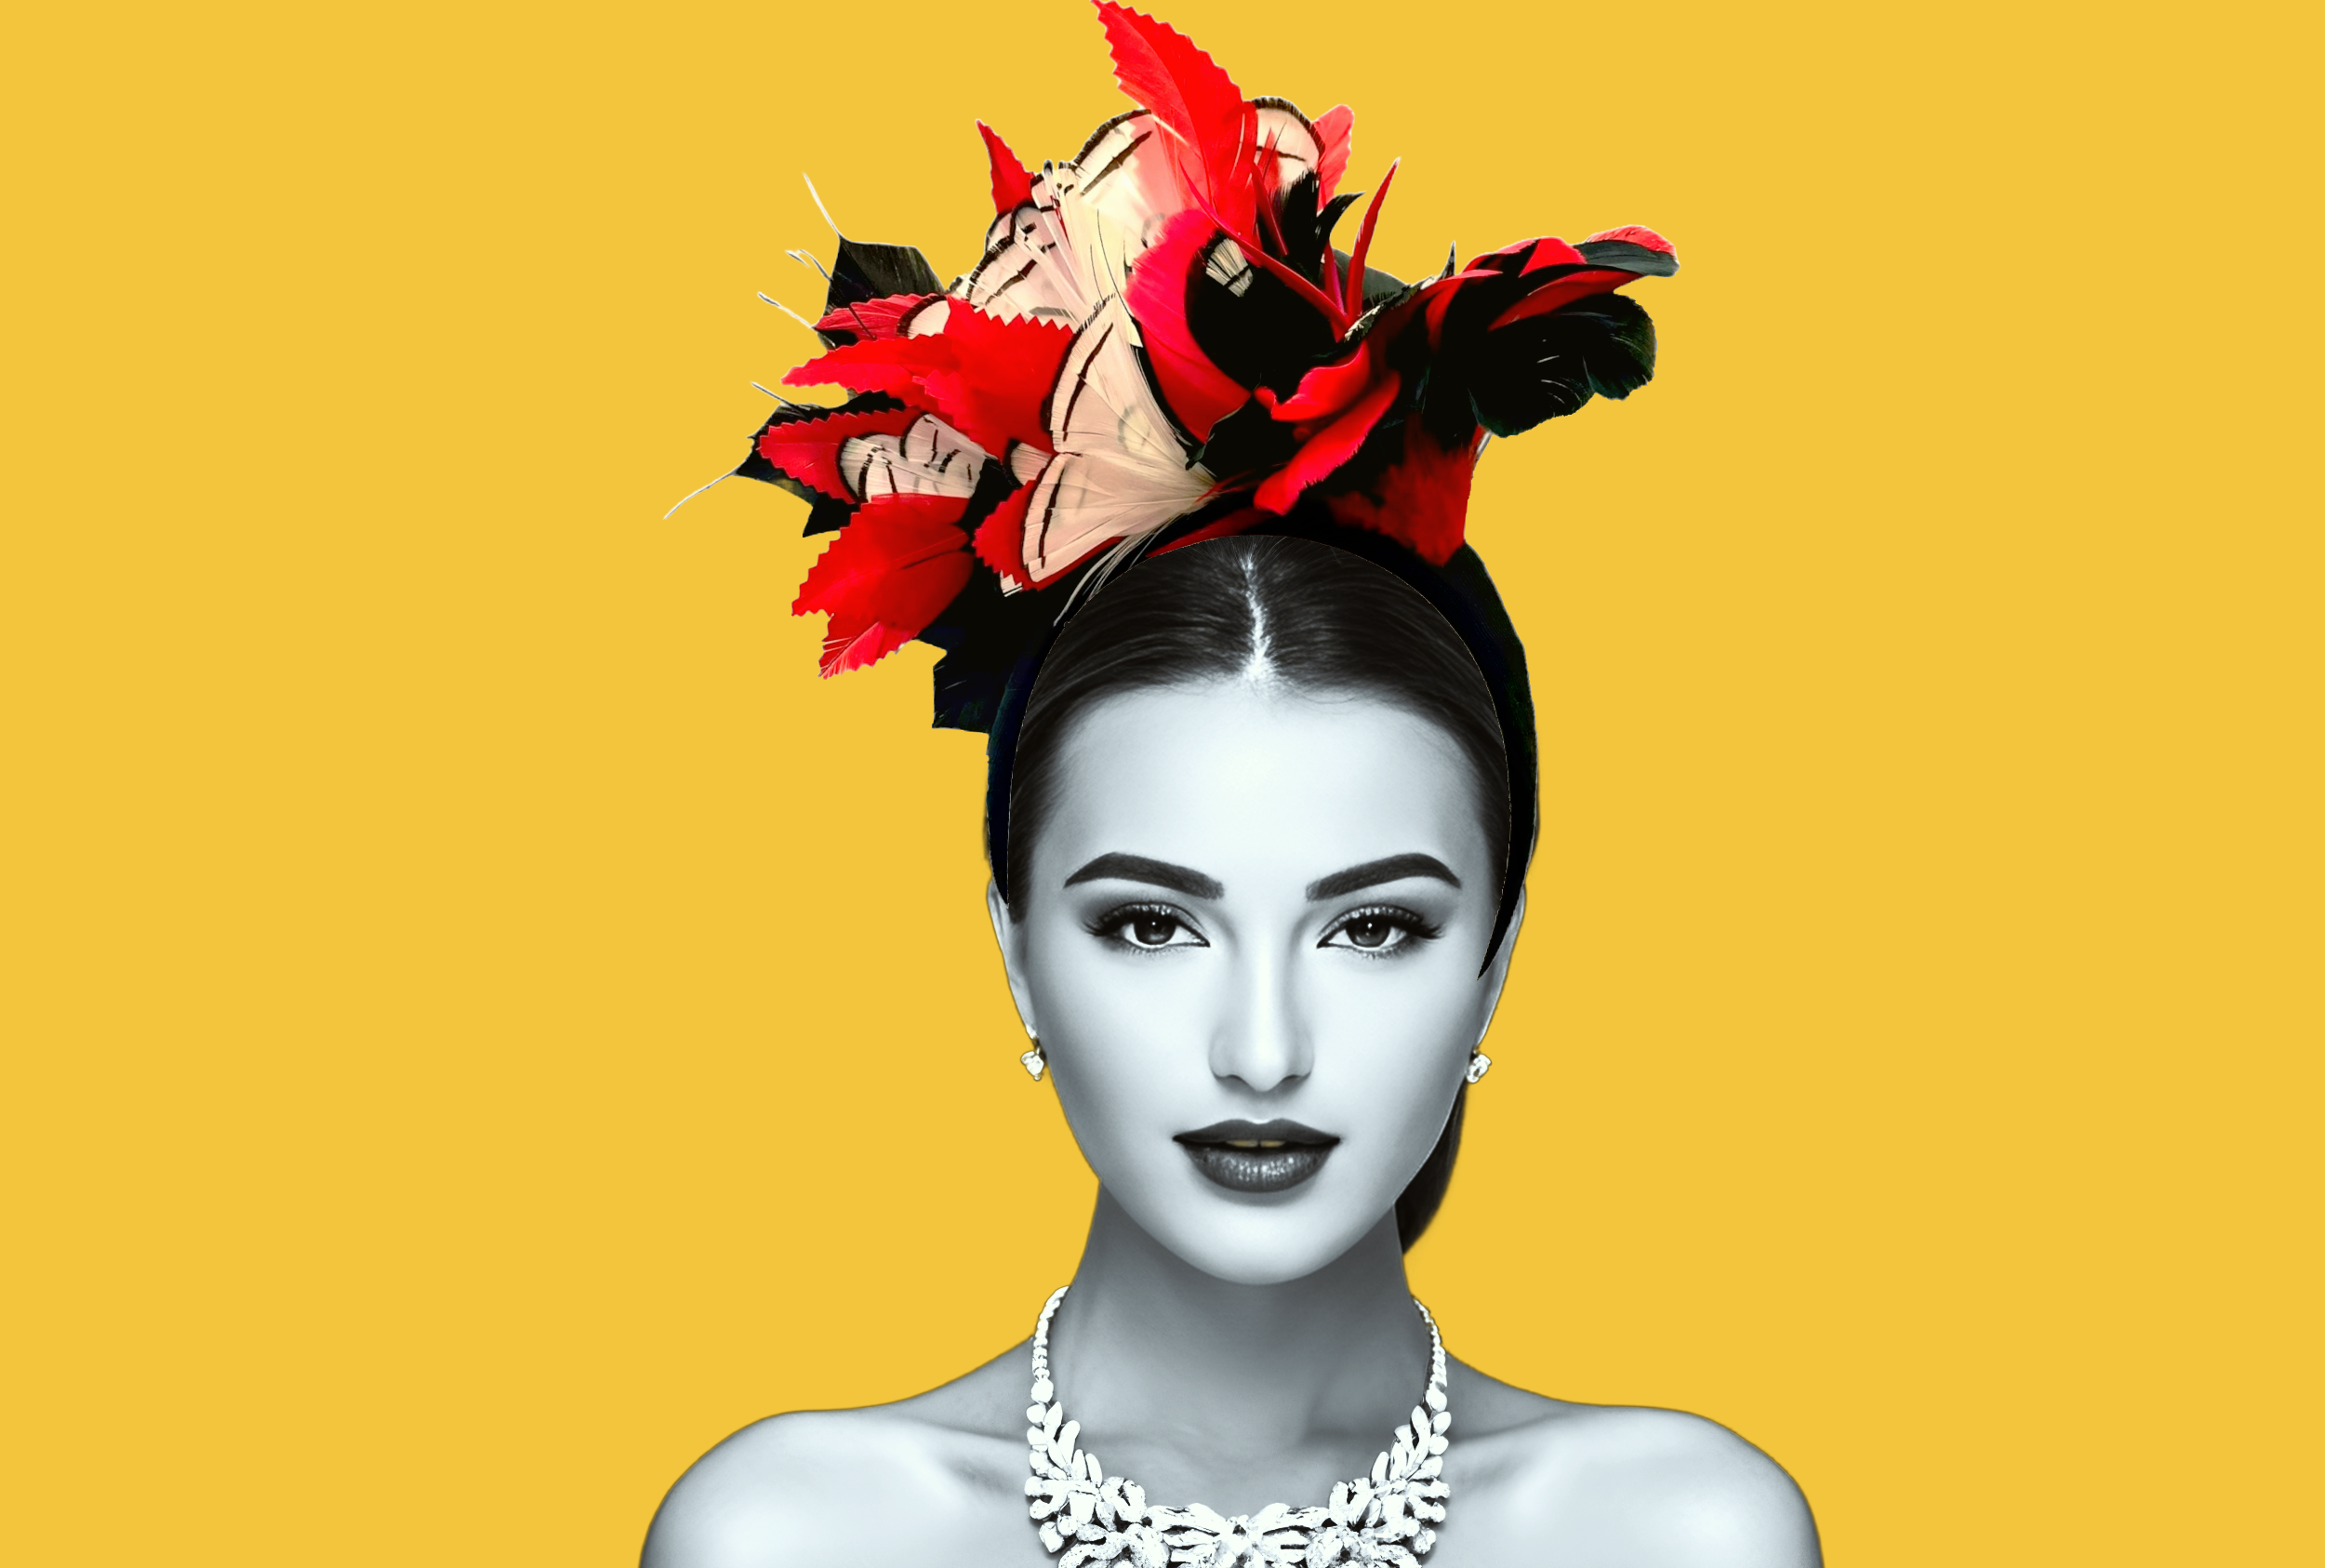 Woody and Blue bespoke headband with scarlet and black feather decoration shown on black and white image of female model